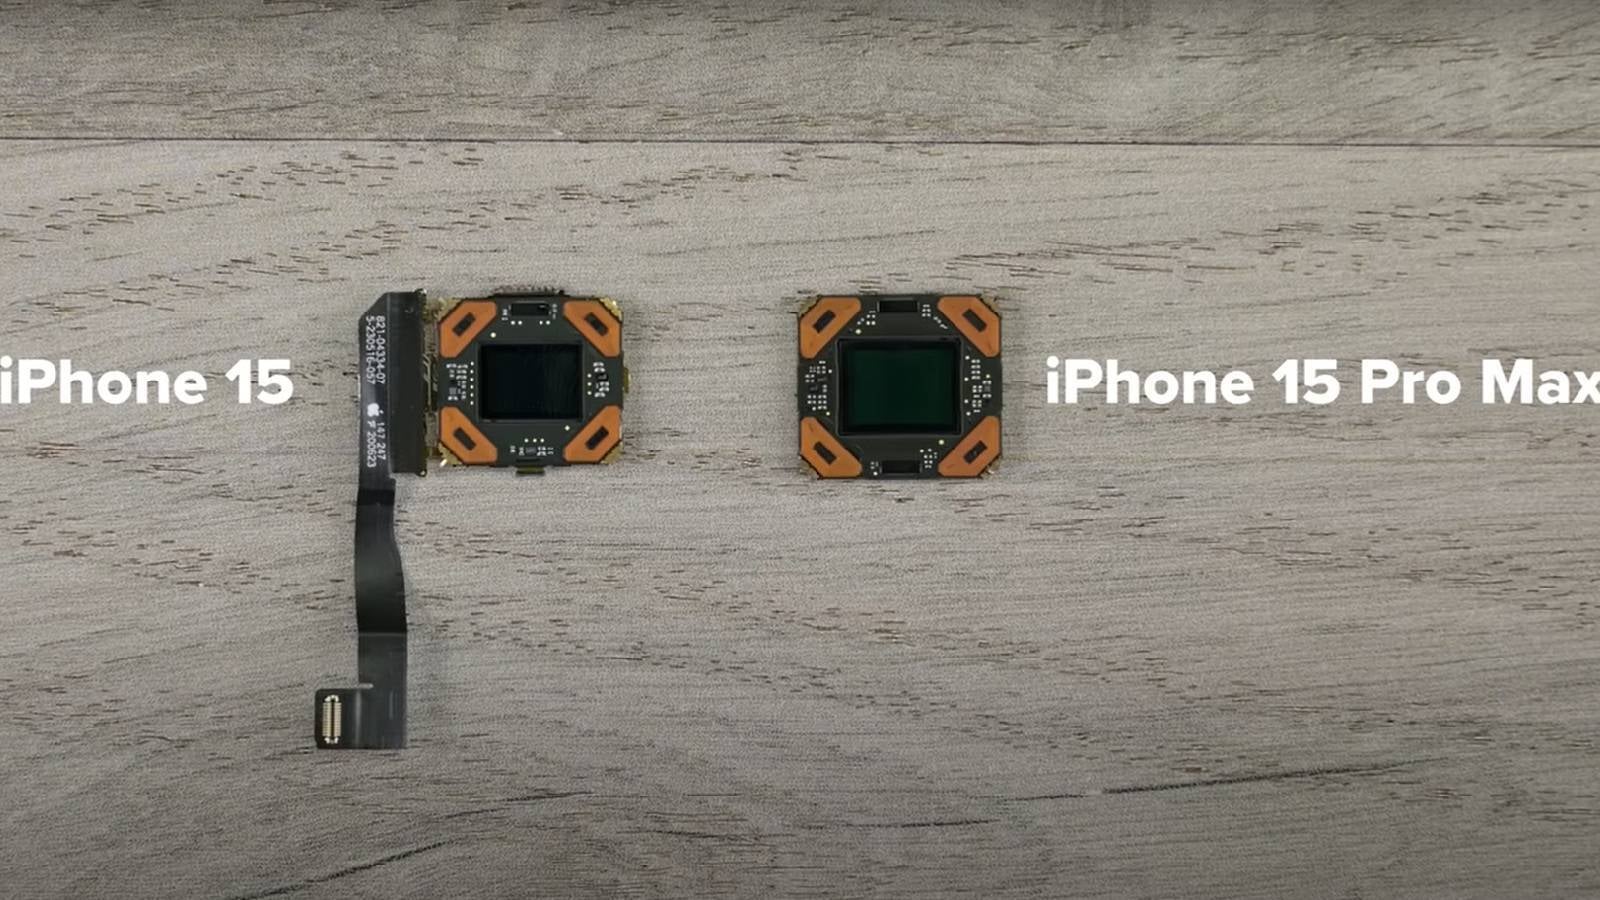 iPhone 15 vs iPhone 15 Pro Max main cameras - Close-up image shows significant size difference between iPhone 15 and Pro Max&#039;s 48MP cameras